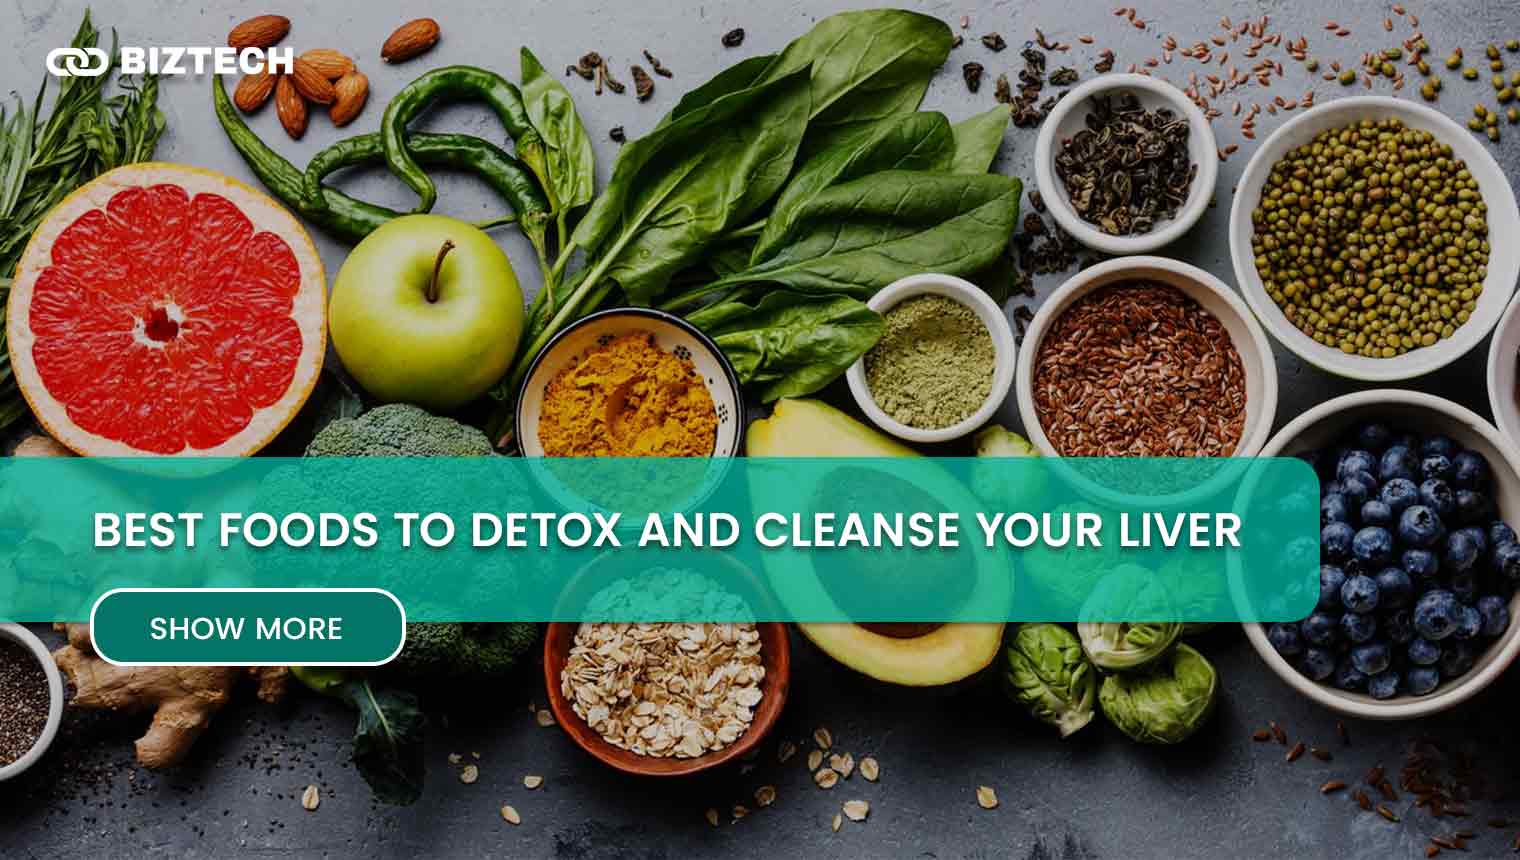 Best Foods to Detox and Cleanse Your Liver